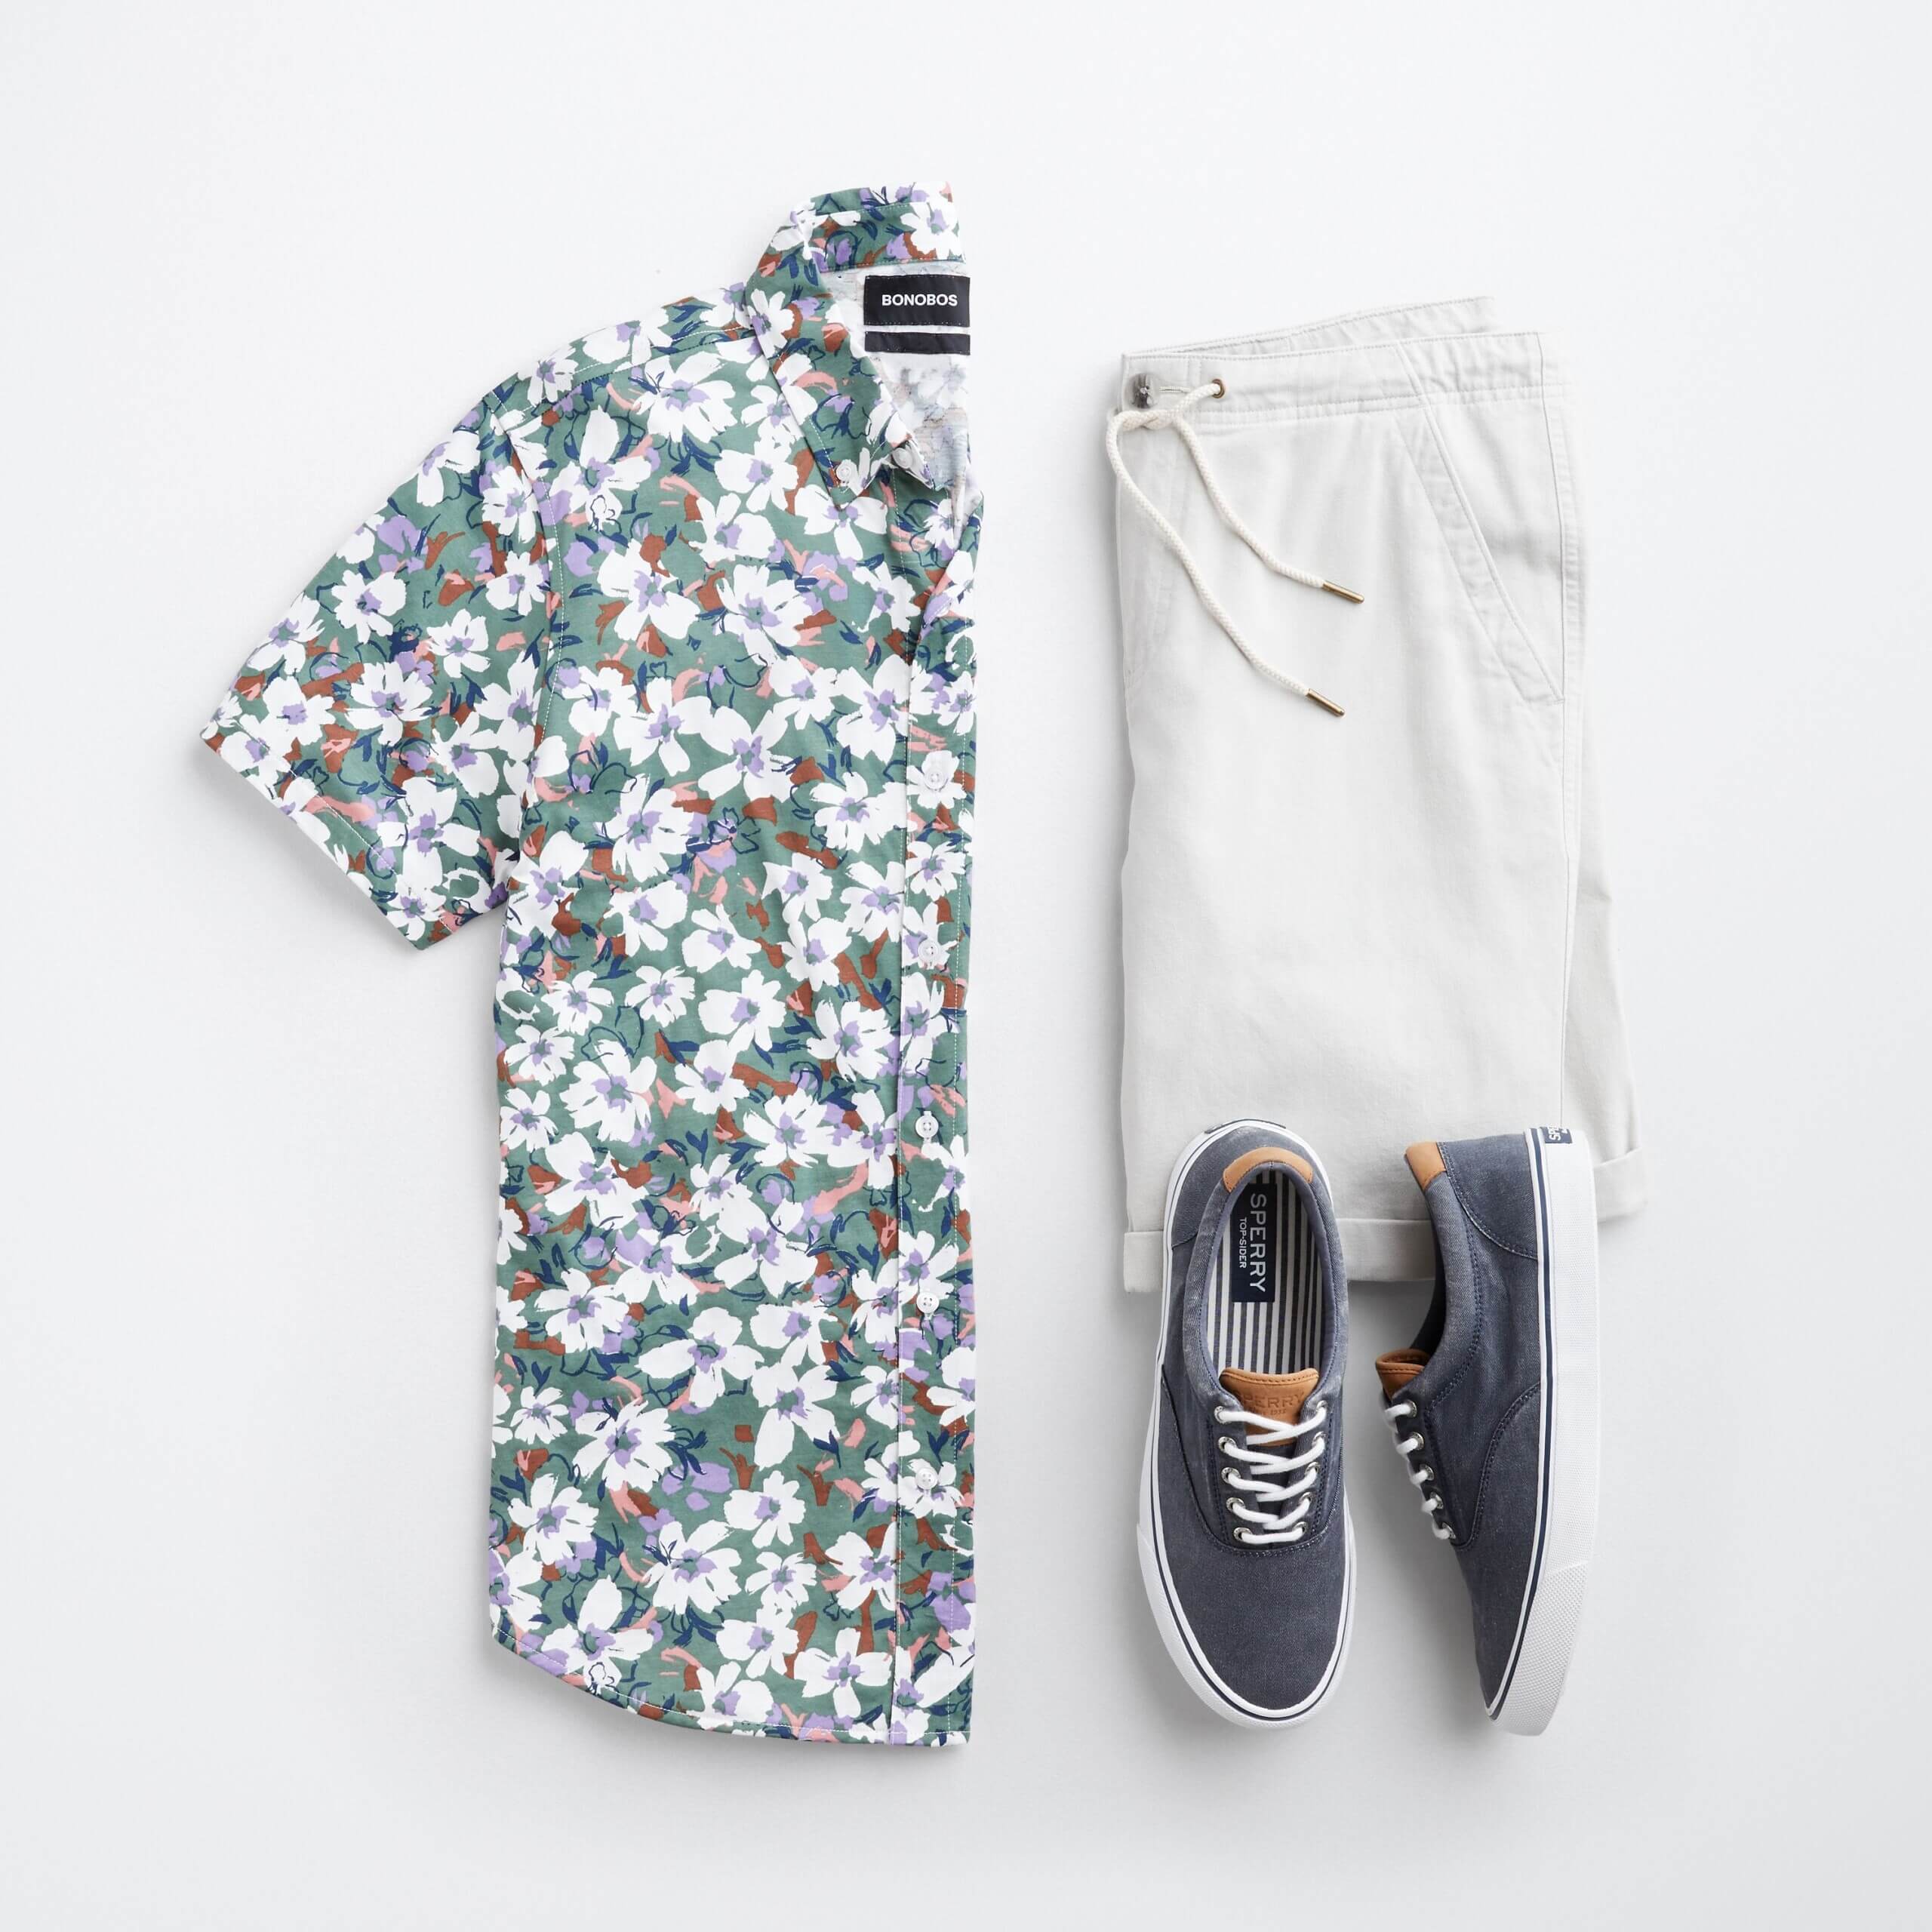 Stitch Fix men’s resort outfit featuring multi-colored short-sleeve button-down tropical shirt, white drawstring shorts and navy sneakers.